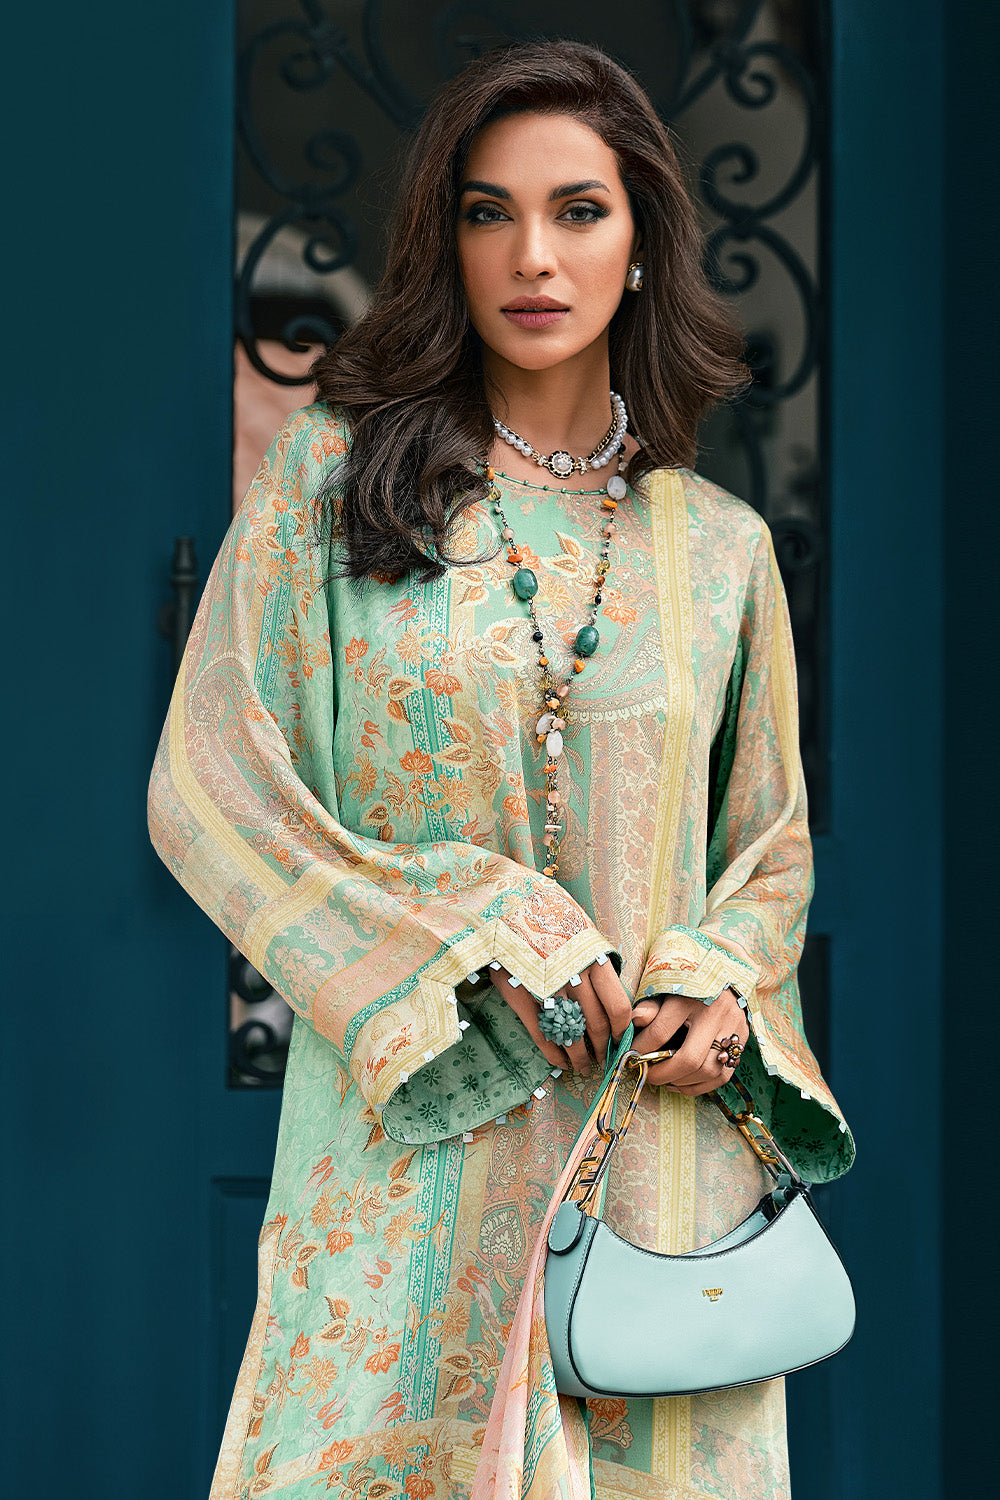 Mint Green Color Satin Floral Printed Unstitched Suit Material